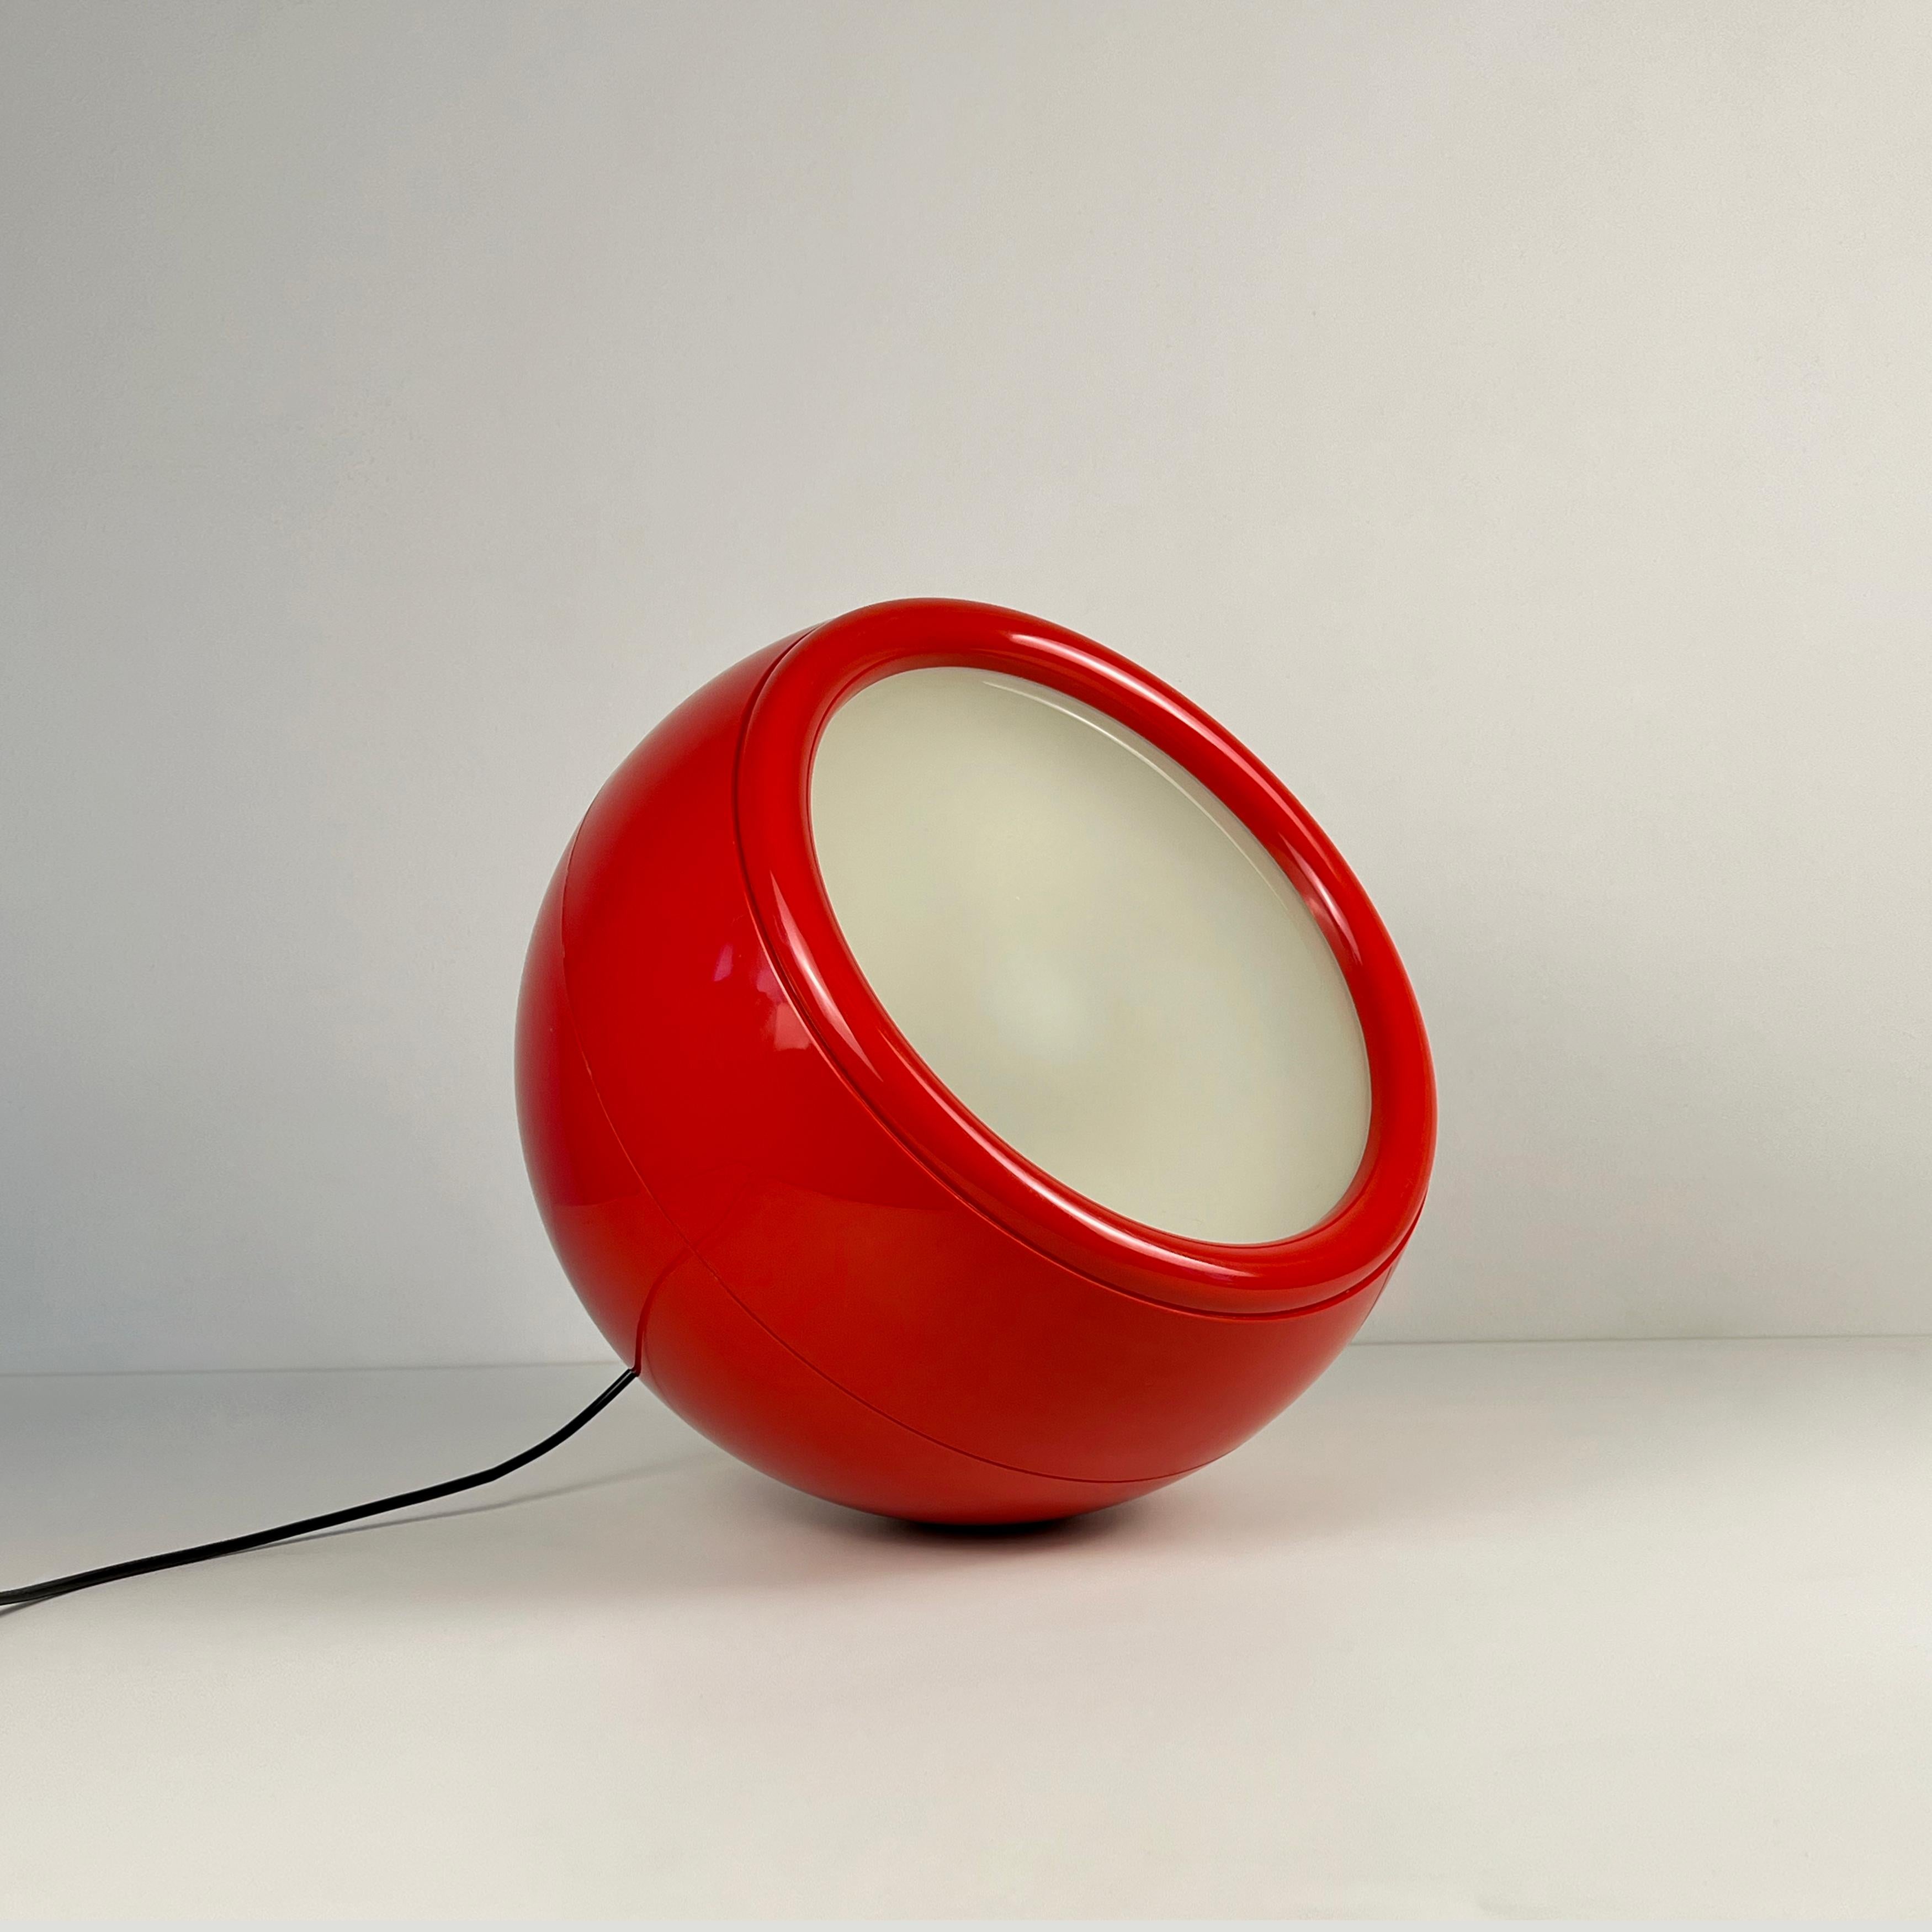 Red Pallade (1st Ed. 1968) floor lamp designed by Studio Tetrarch for Artemide For Sale 5